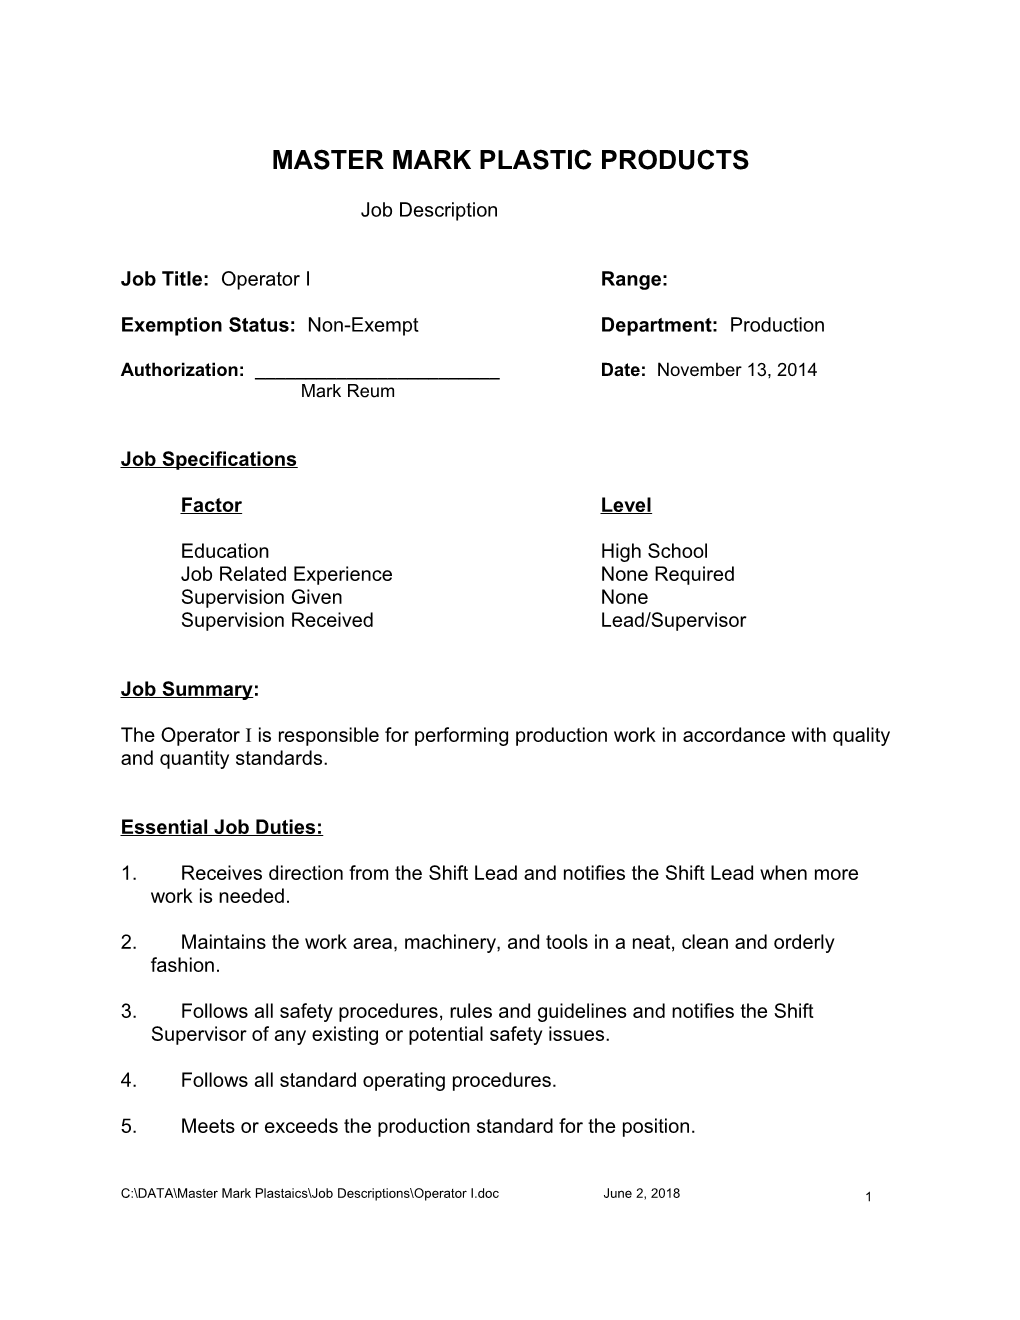 Master Mark Plastic Products